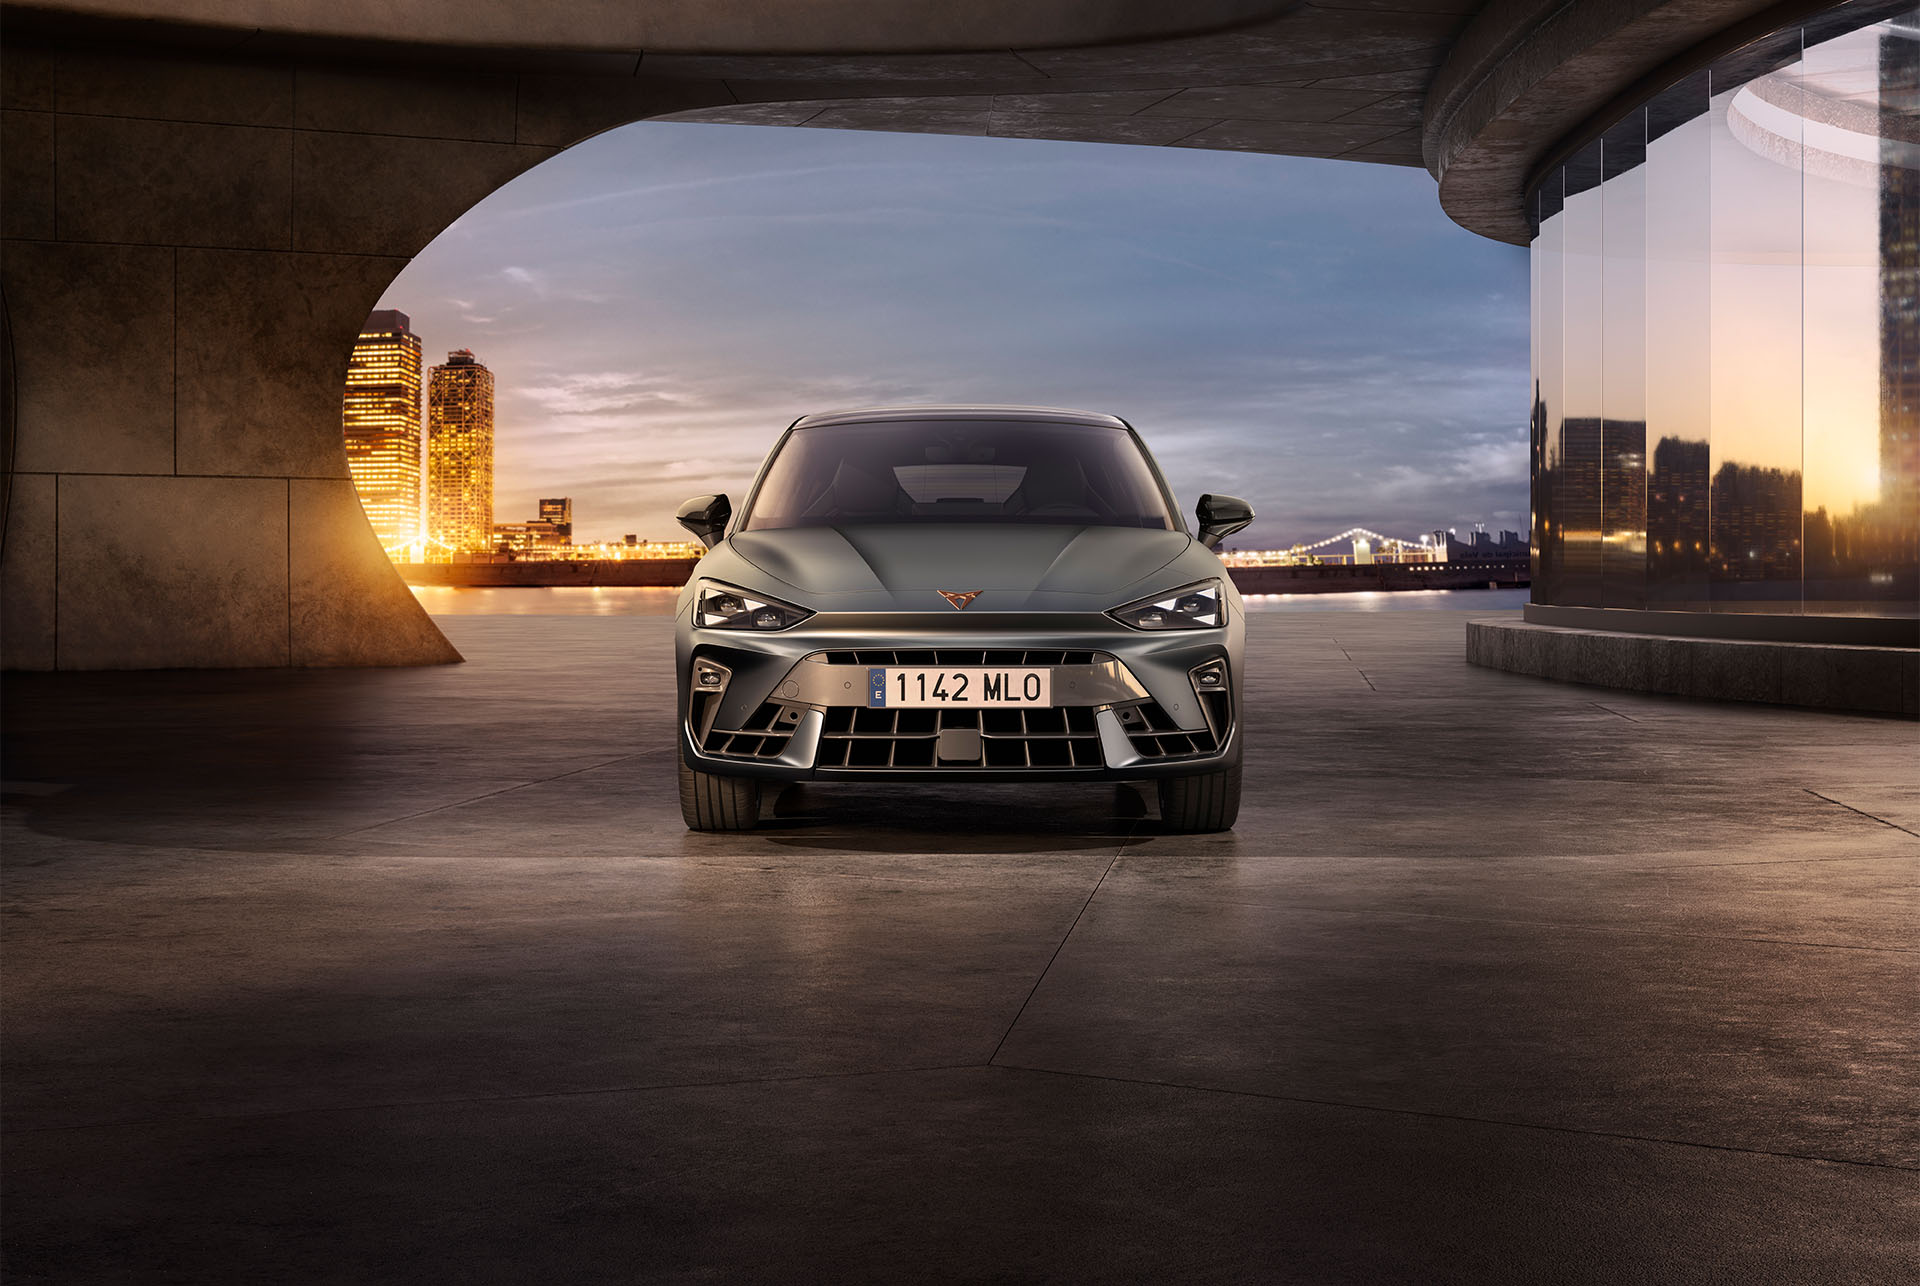 new cupra leon 2024 car model versions and equipment, air intakes, triangle eye headlights, sunset, glass panels, architecture and blue skies.